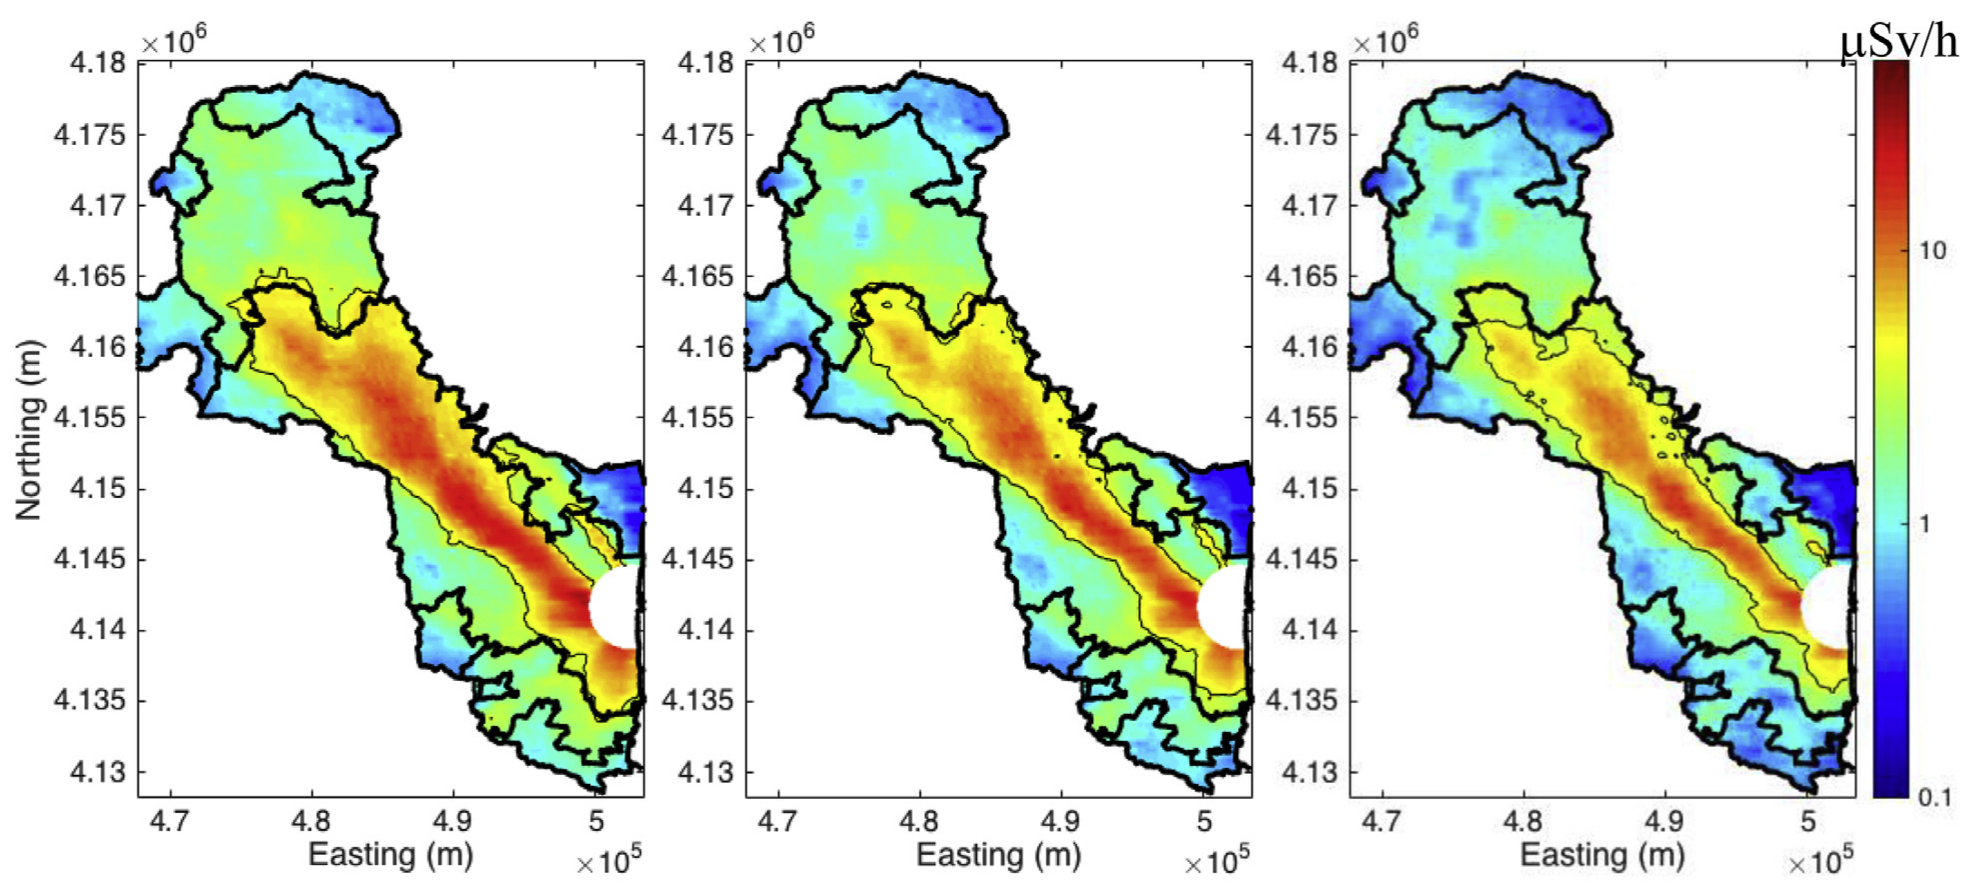 Image - These maps show radiation dose rates in the Fukushima region over time. At left is data from 2014, at middle is data from 2015, and at right is data from 2016. There is a visible reduction in the areas with higher dose concentrations from 2014 to 2016 – higher concentrations show as red and yellow.